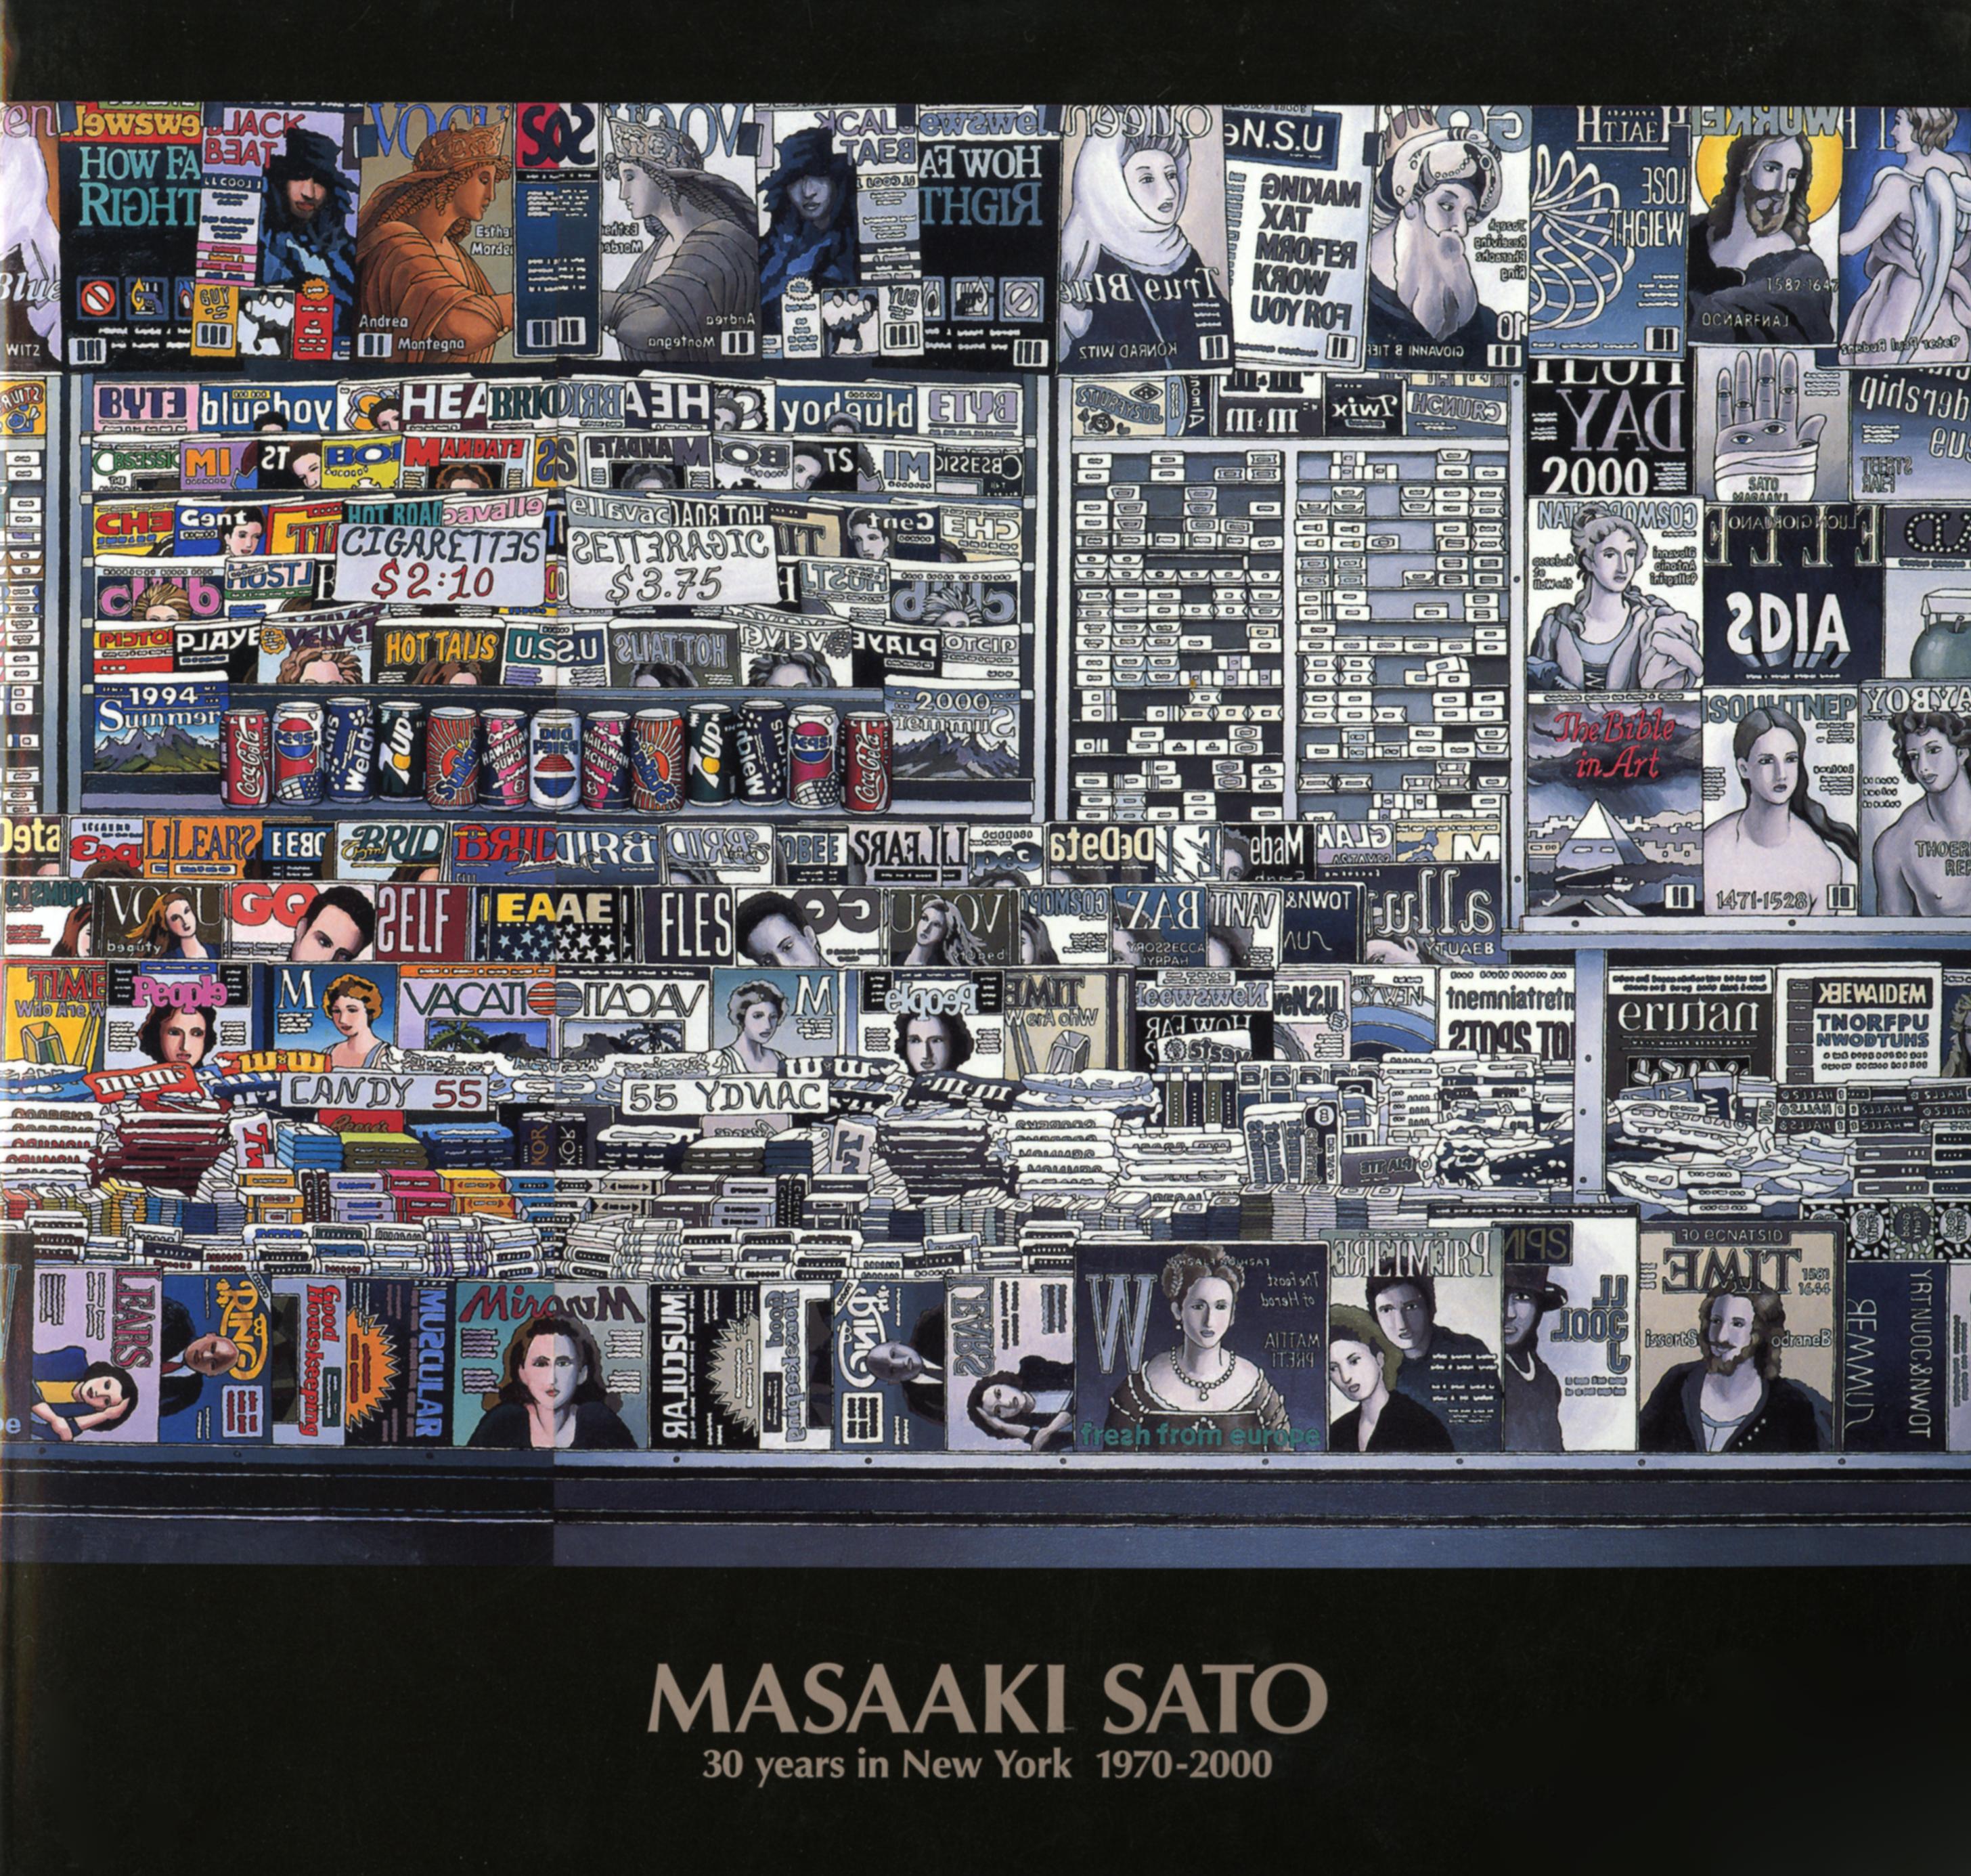 A collage of images on an exhibition catalog of Masaaki Sato.